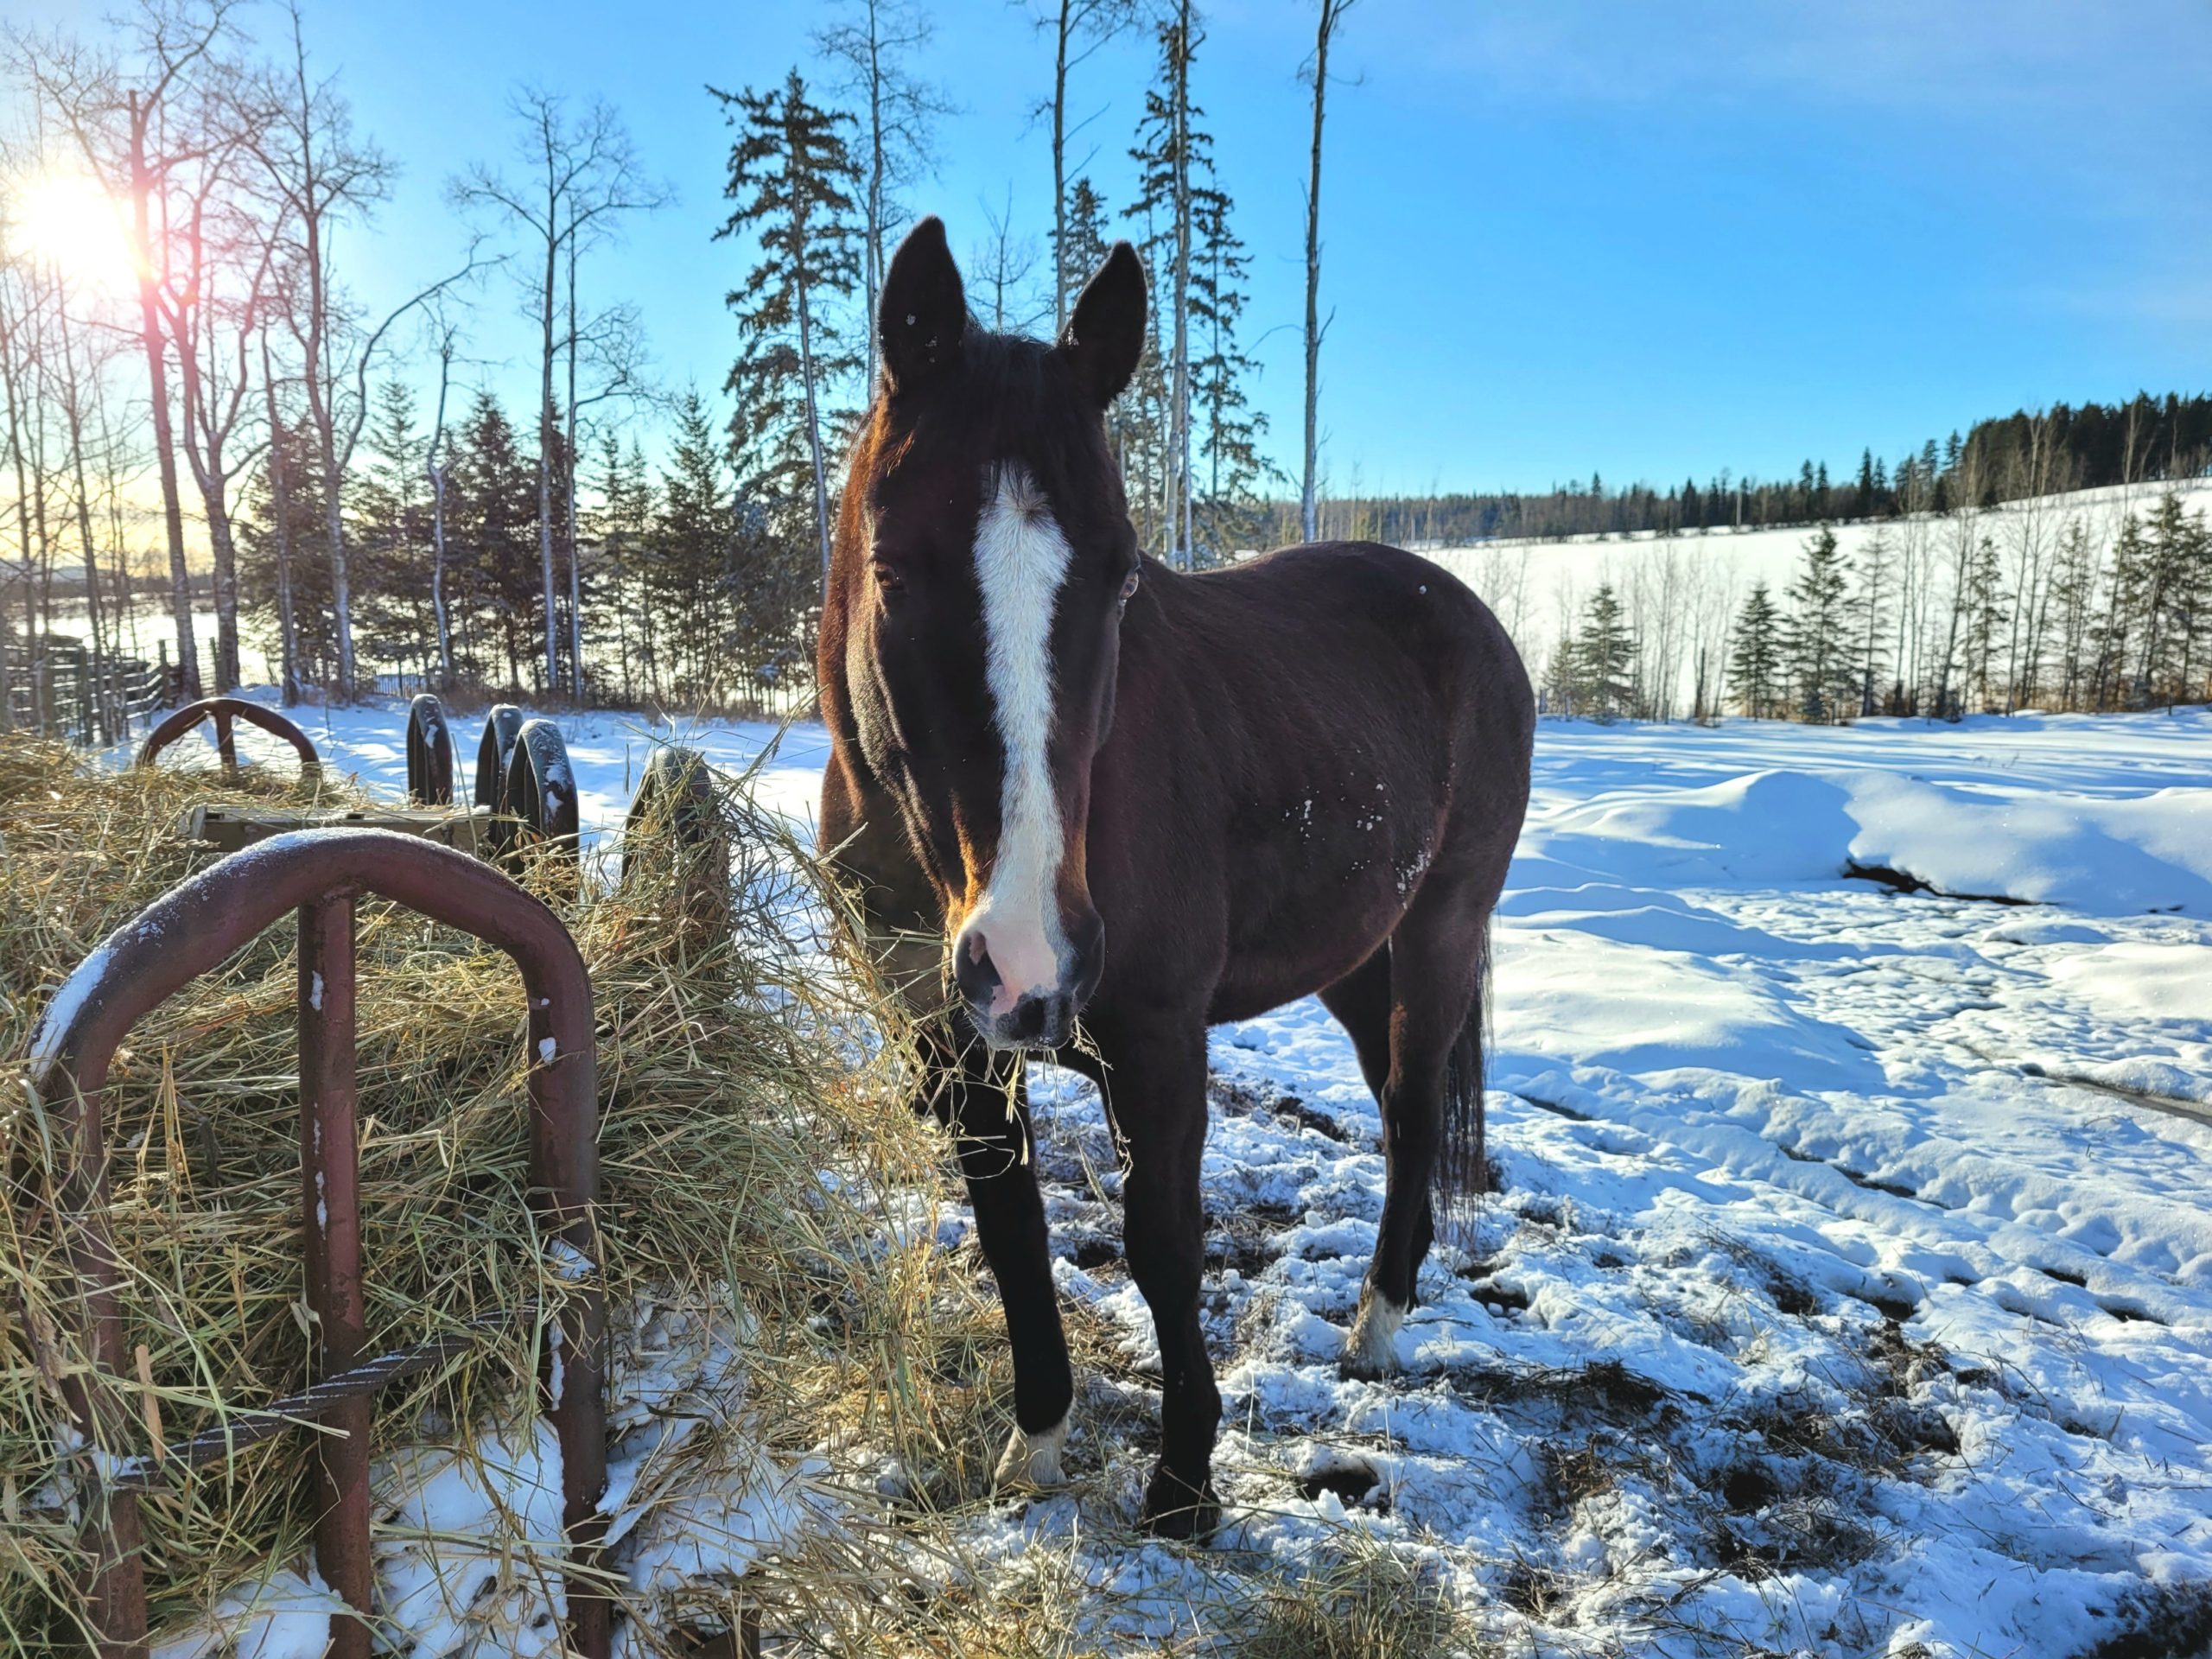 photo of a thoroughbred horse eating hay from a round feeder in a snowy paddock